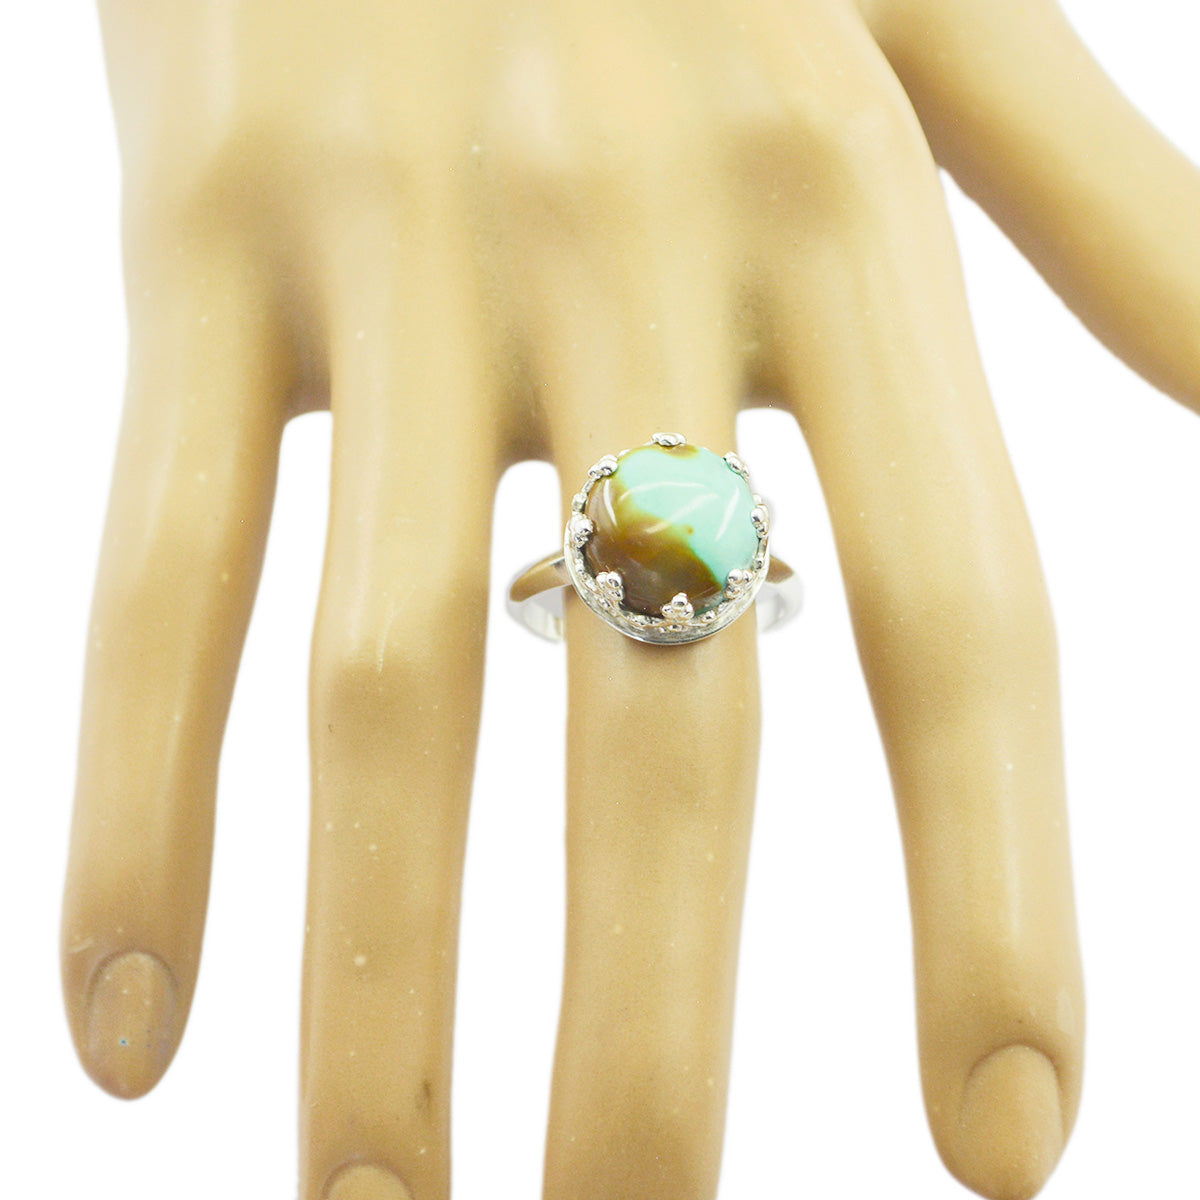 Riyo Attractive Gems Turquoise Sterling Silver Ring Peacock Jewelry